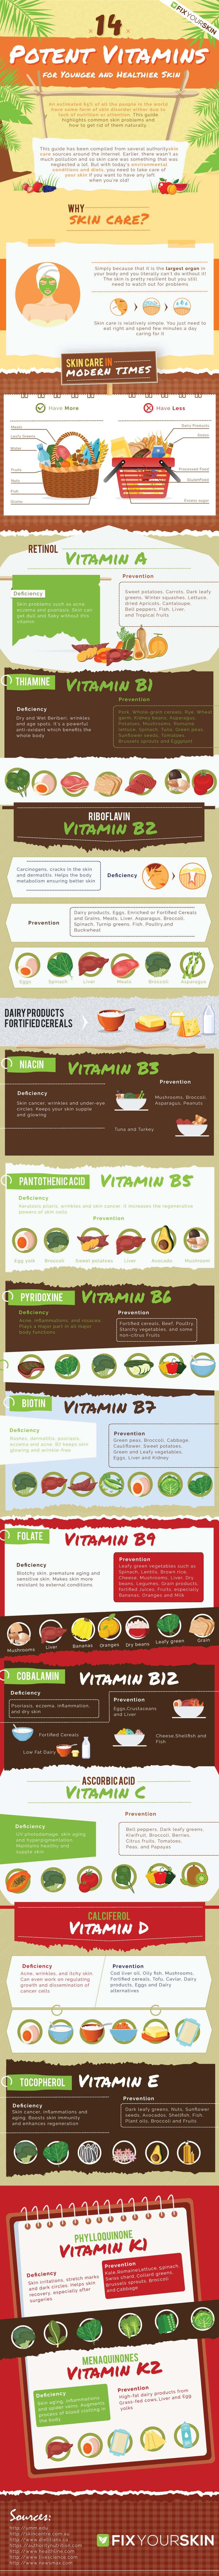 14-potent-vitamins-for-younger-and-healthier-skin-infographic-plaza